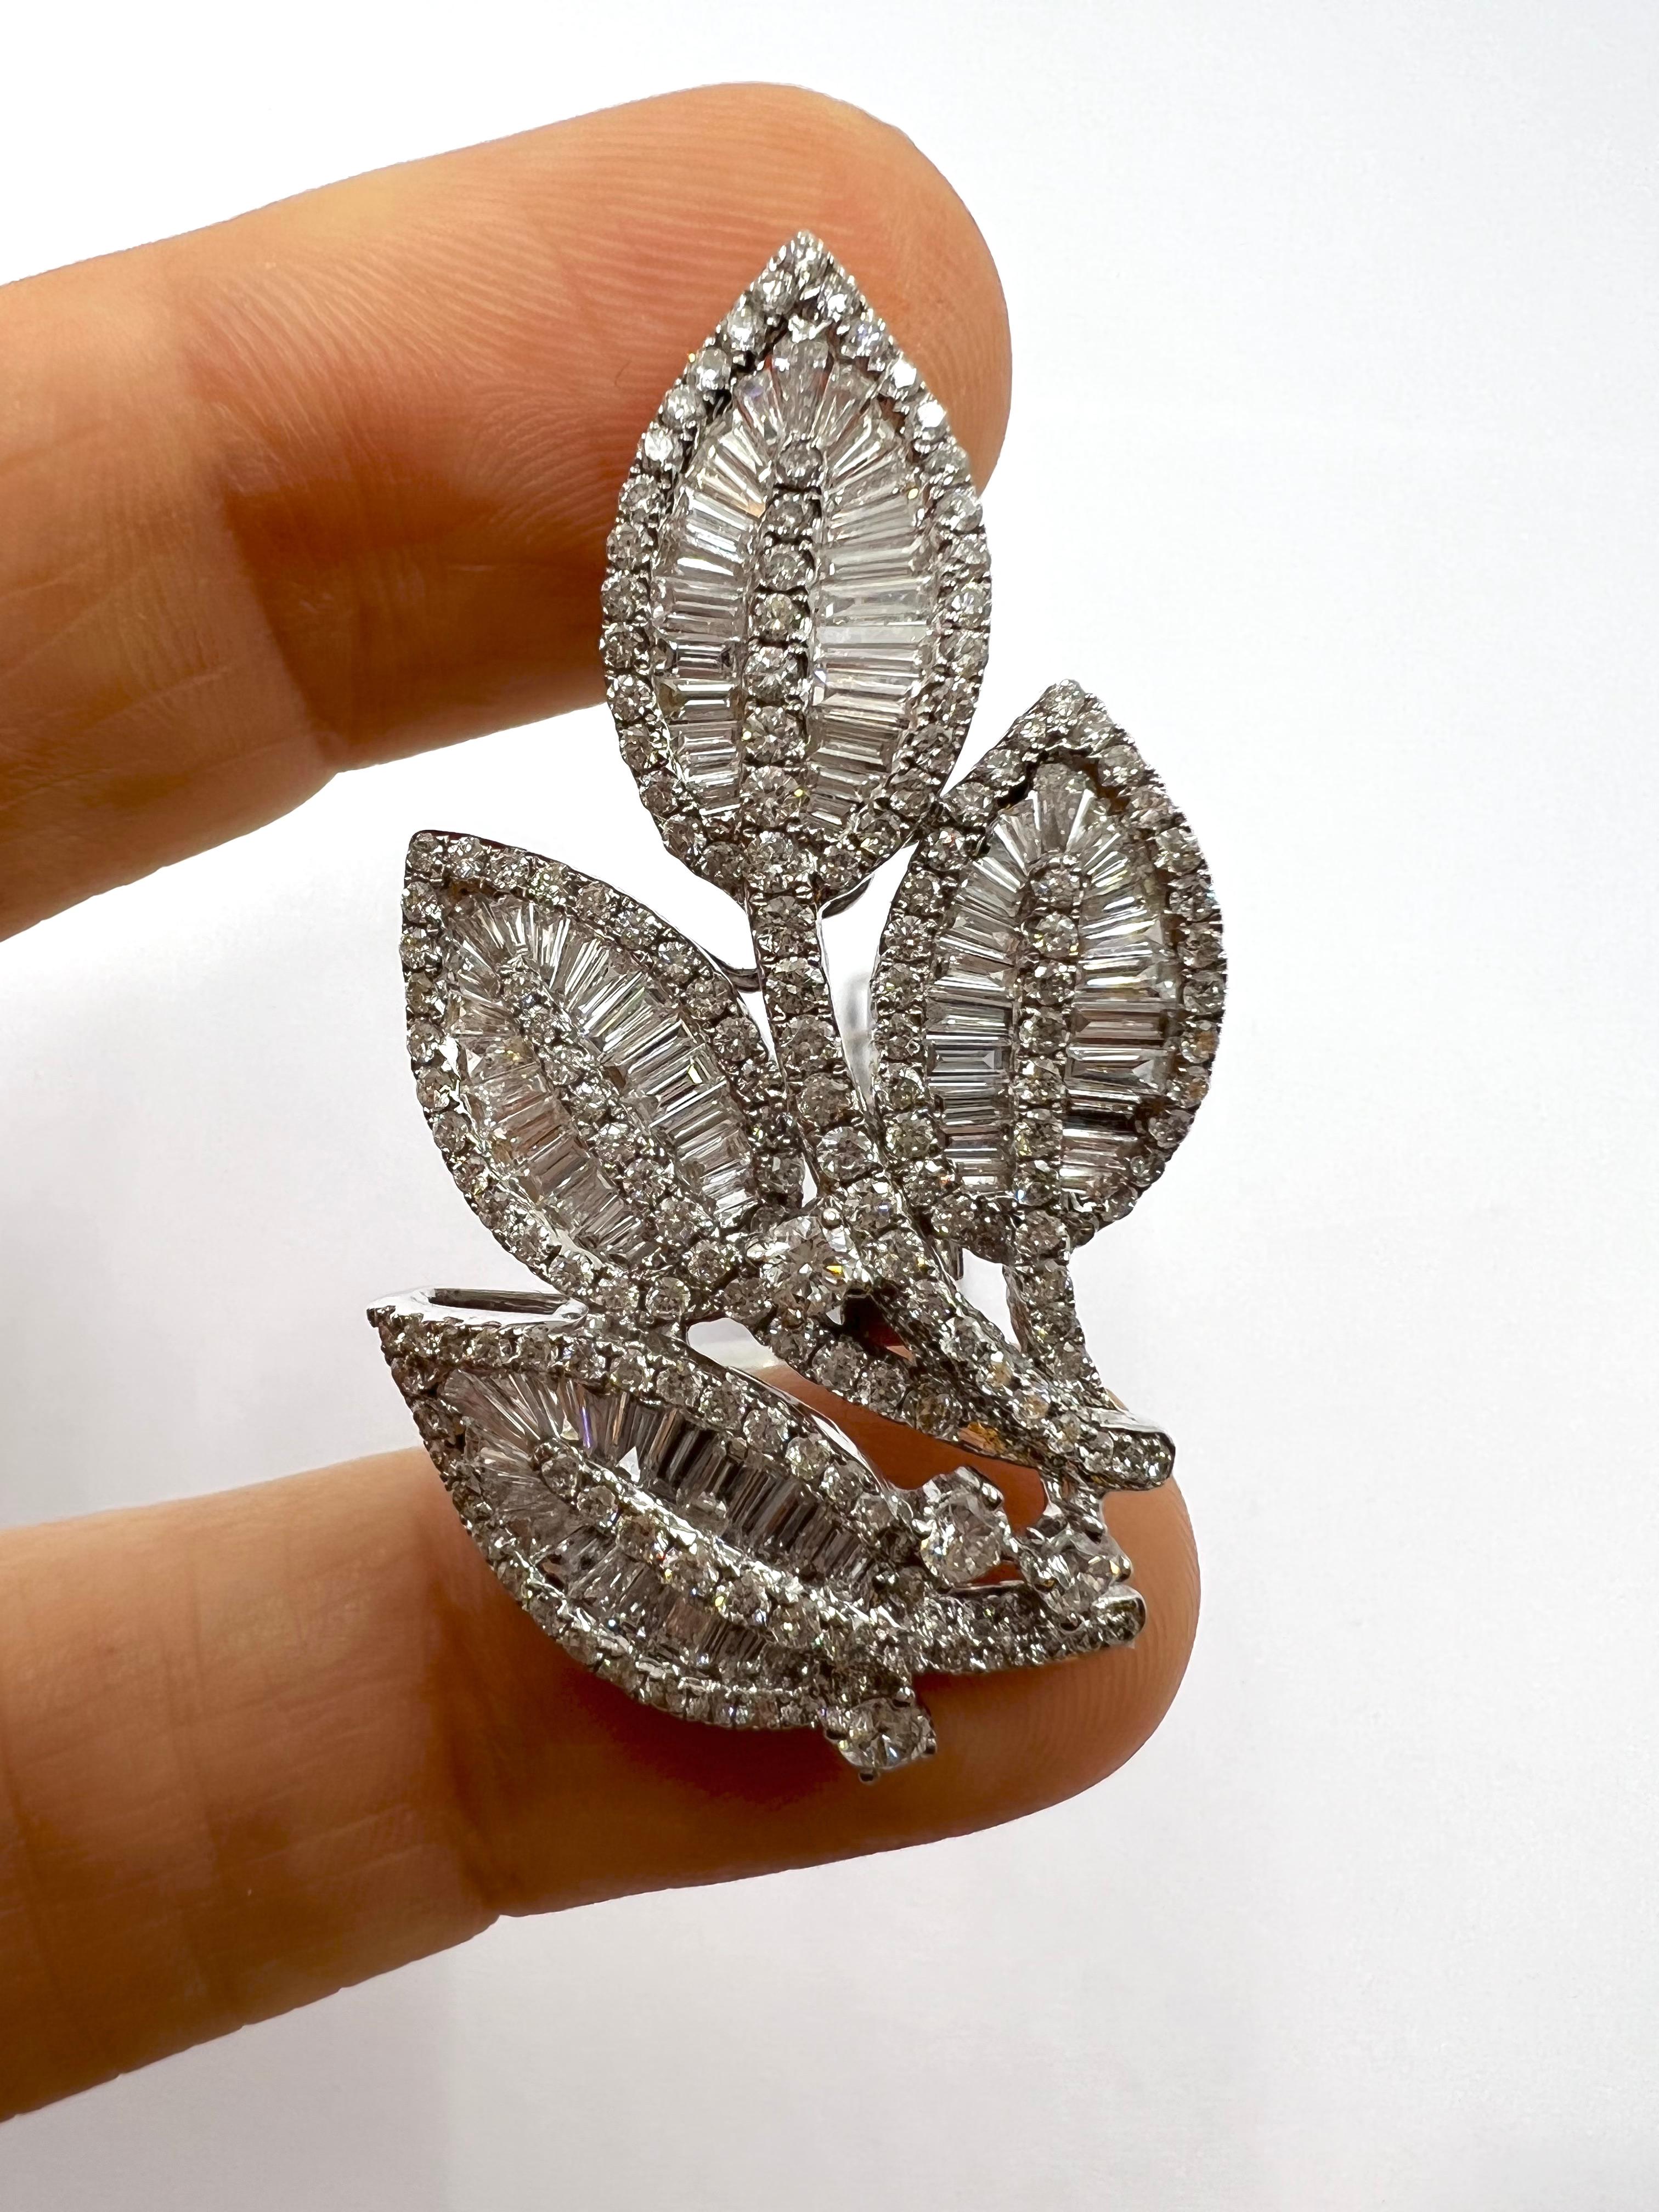 Beautiful pair of earrings representing a bouquet of 4 leaves in white gold paved with 6 carats of diamonds. Each of the 4 leaves has a long stem set with round diamonds, to give contrast and more sparkle the leaves are set in their center with